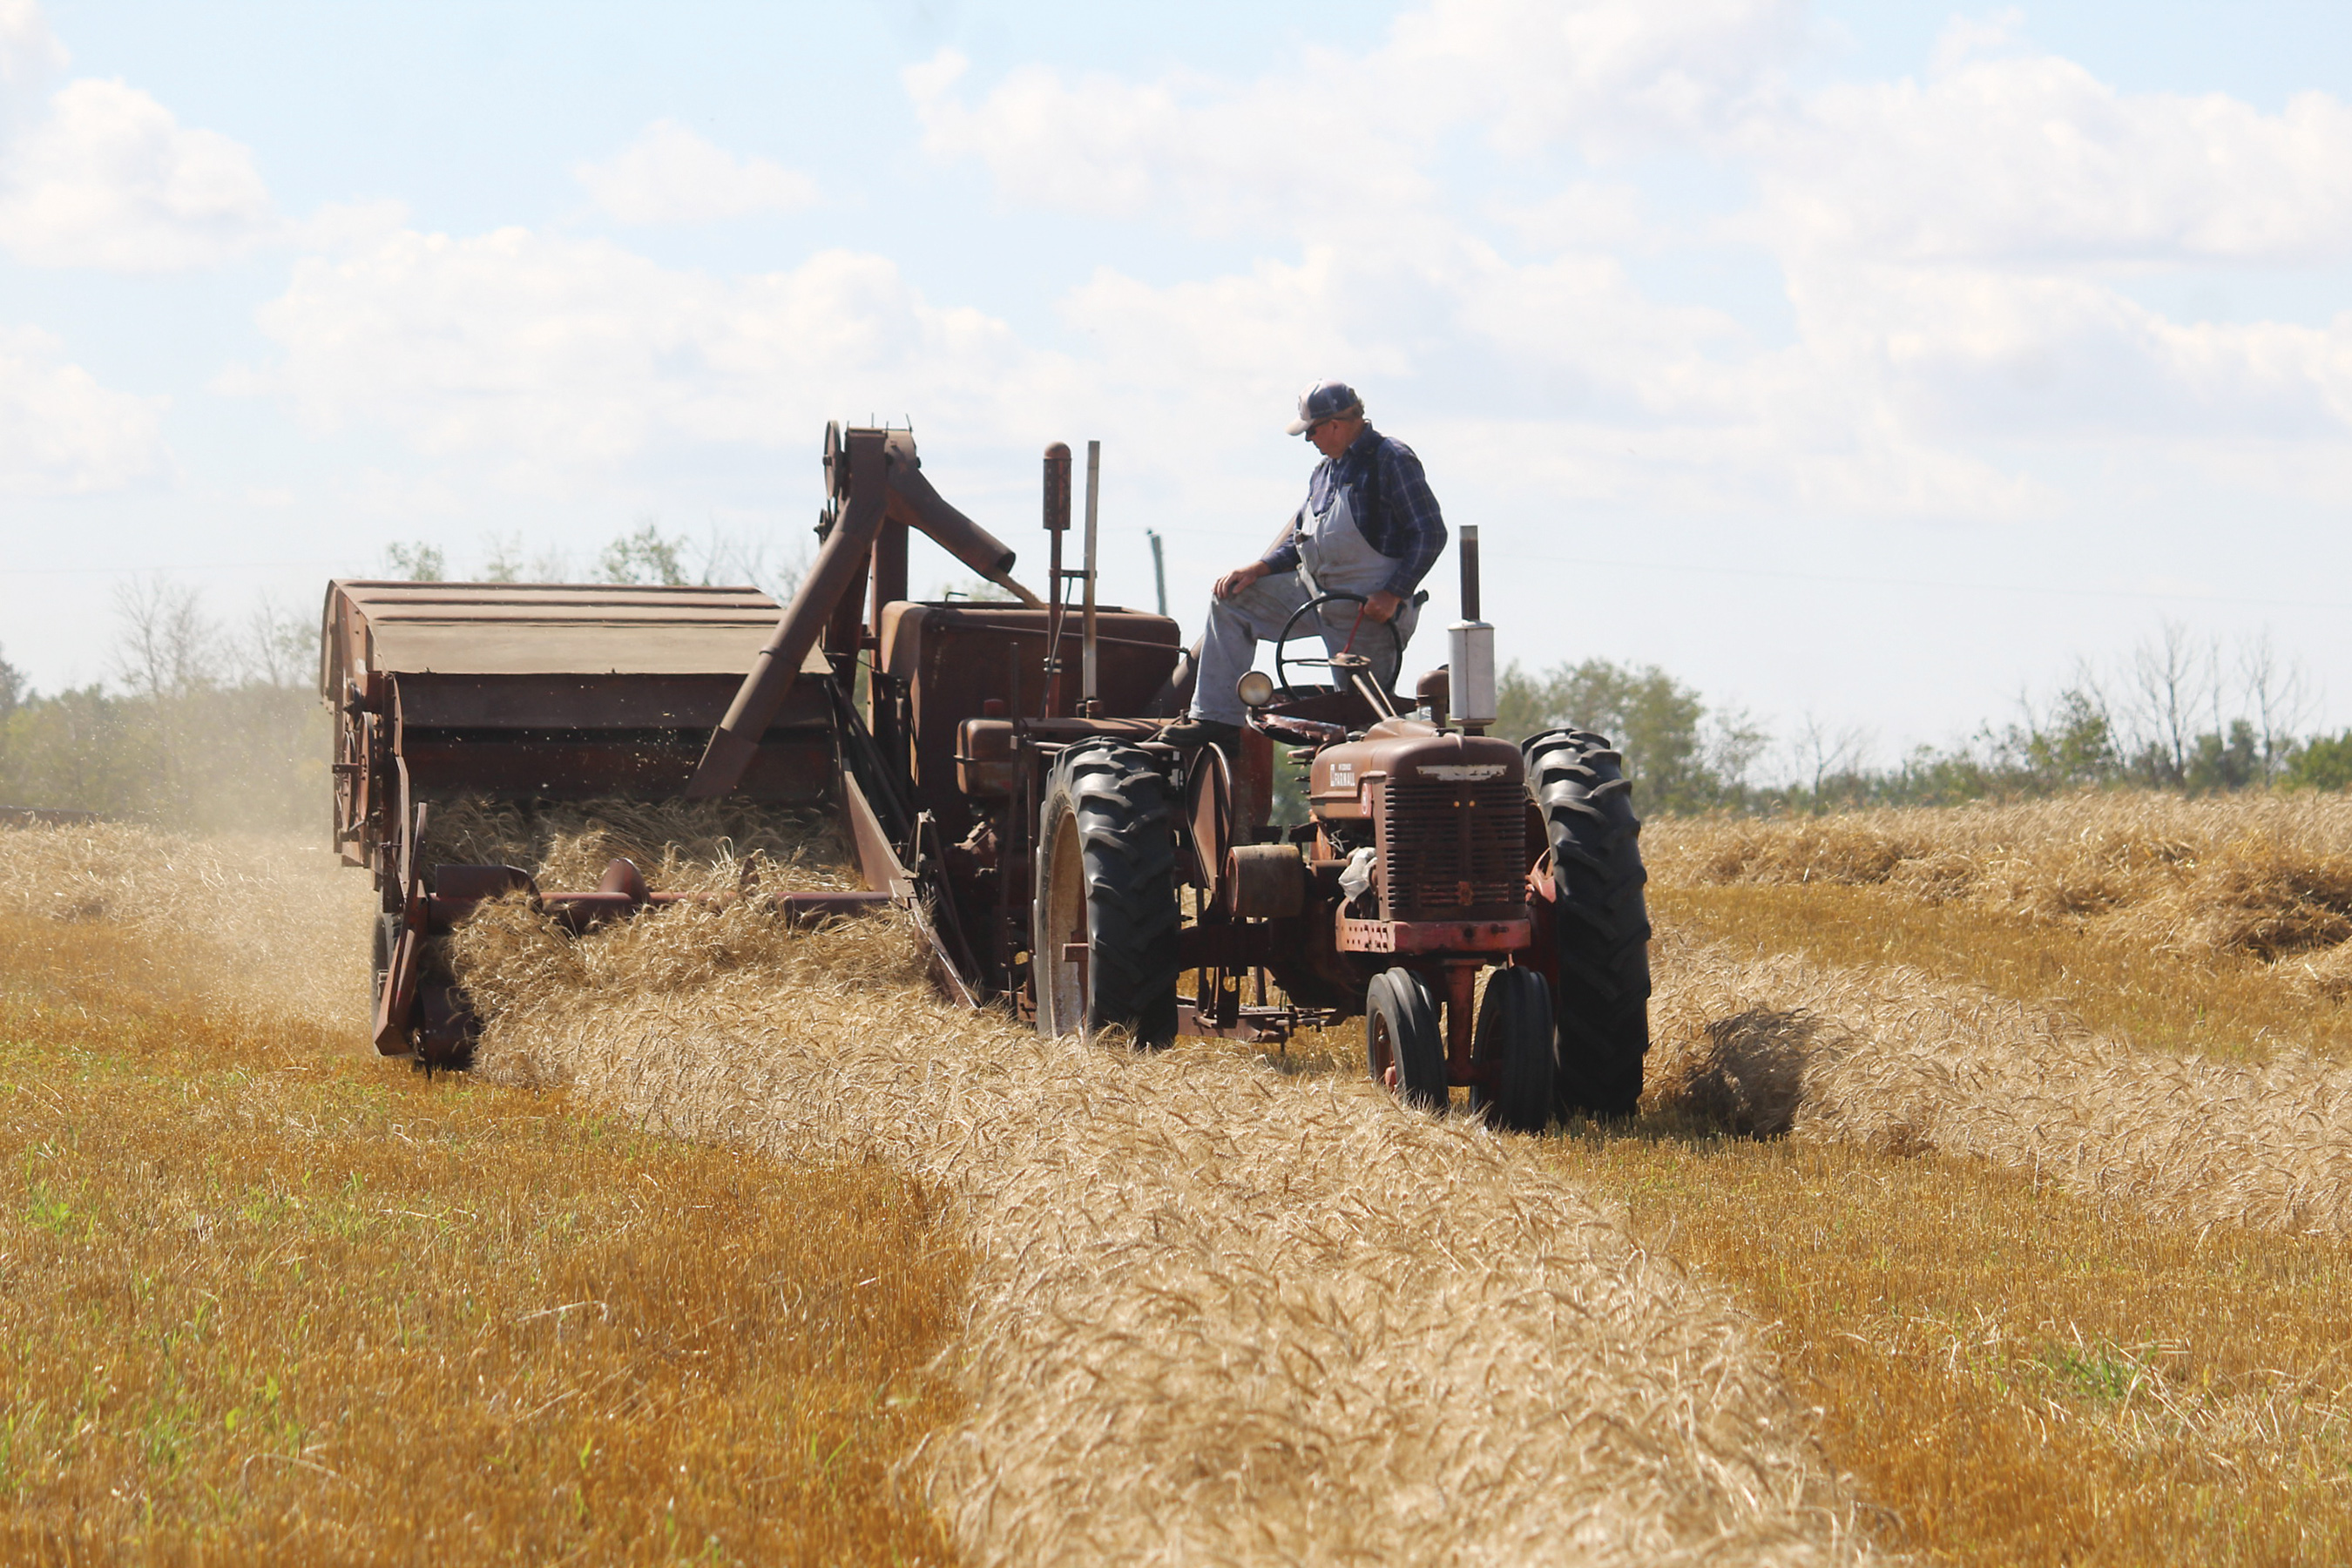 Wheat being harvested the old fashioned way.